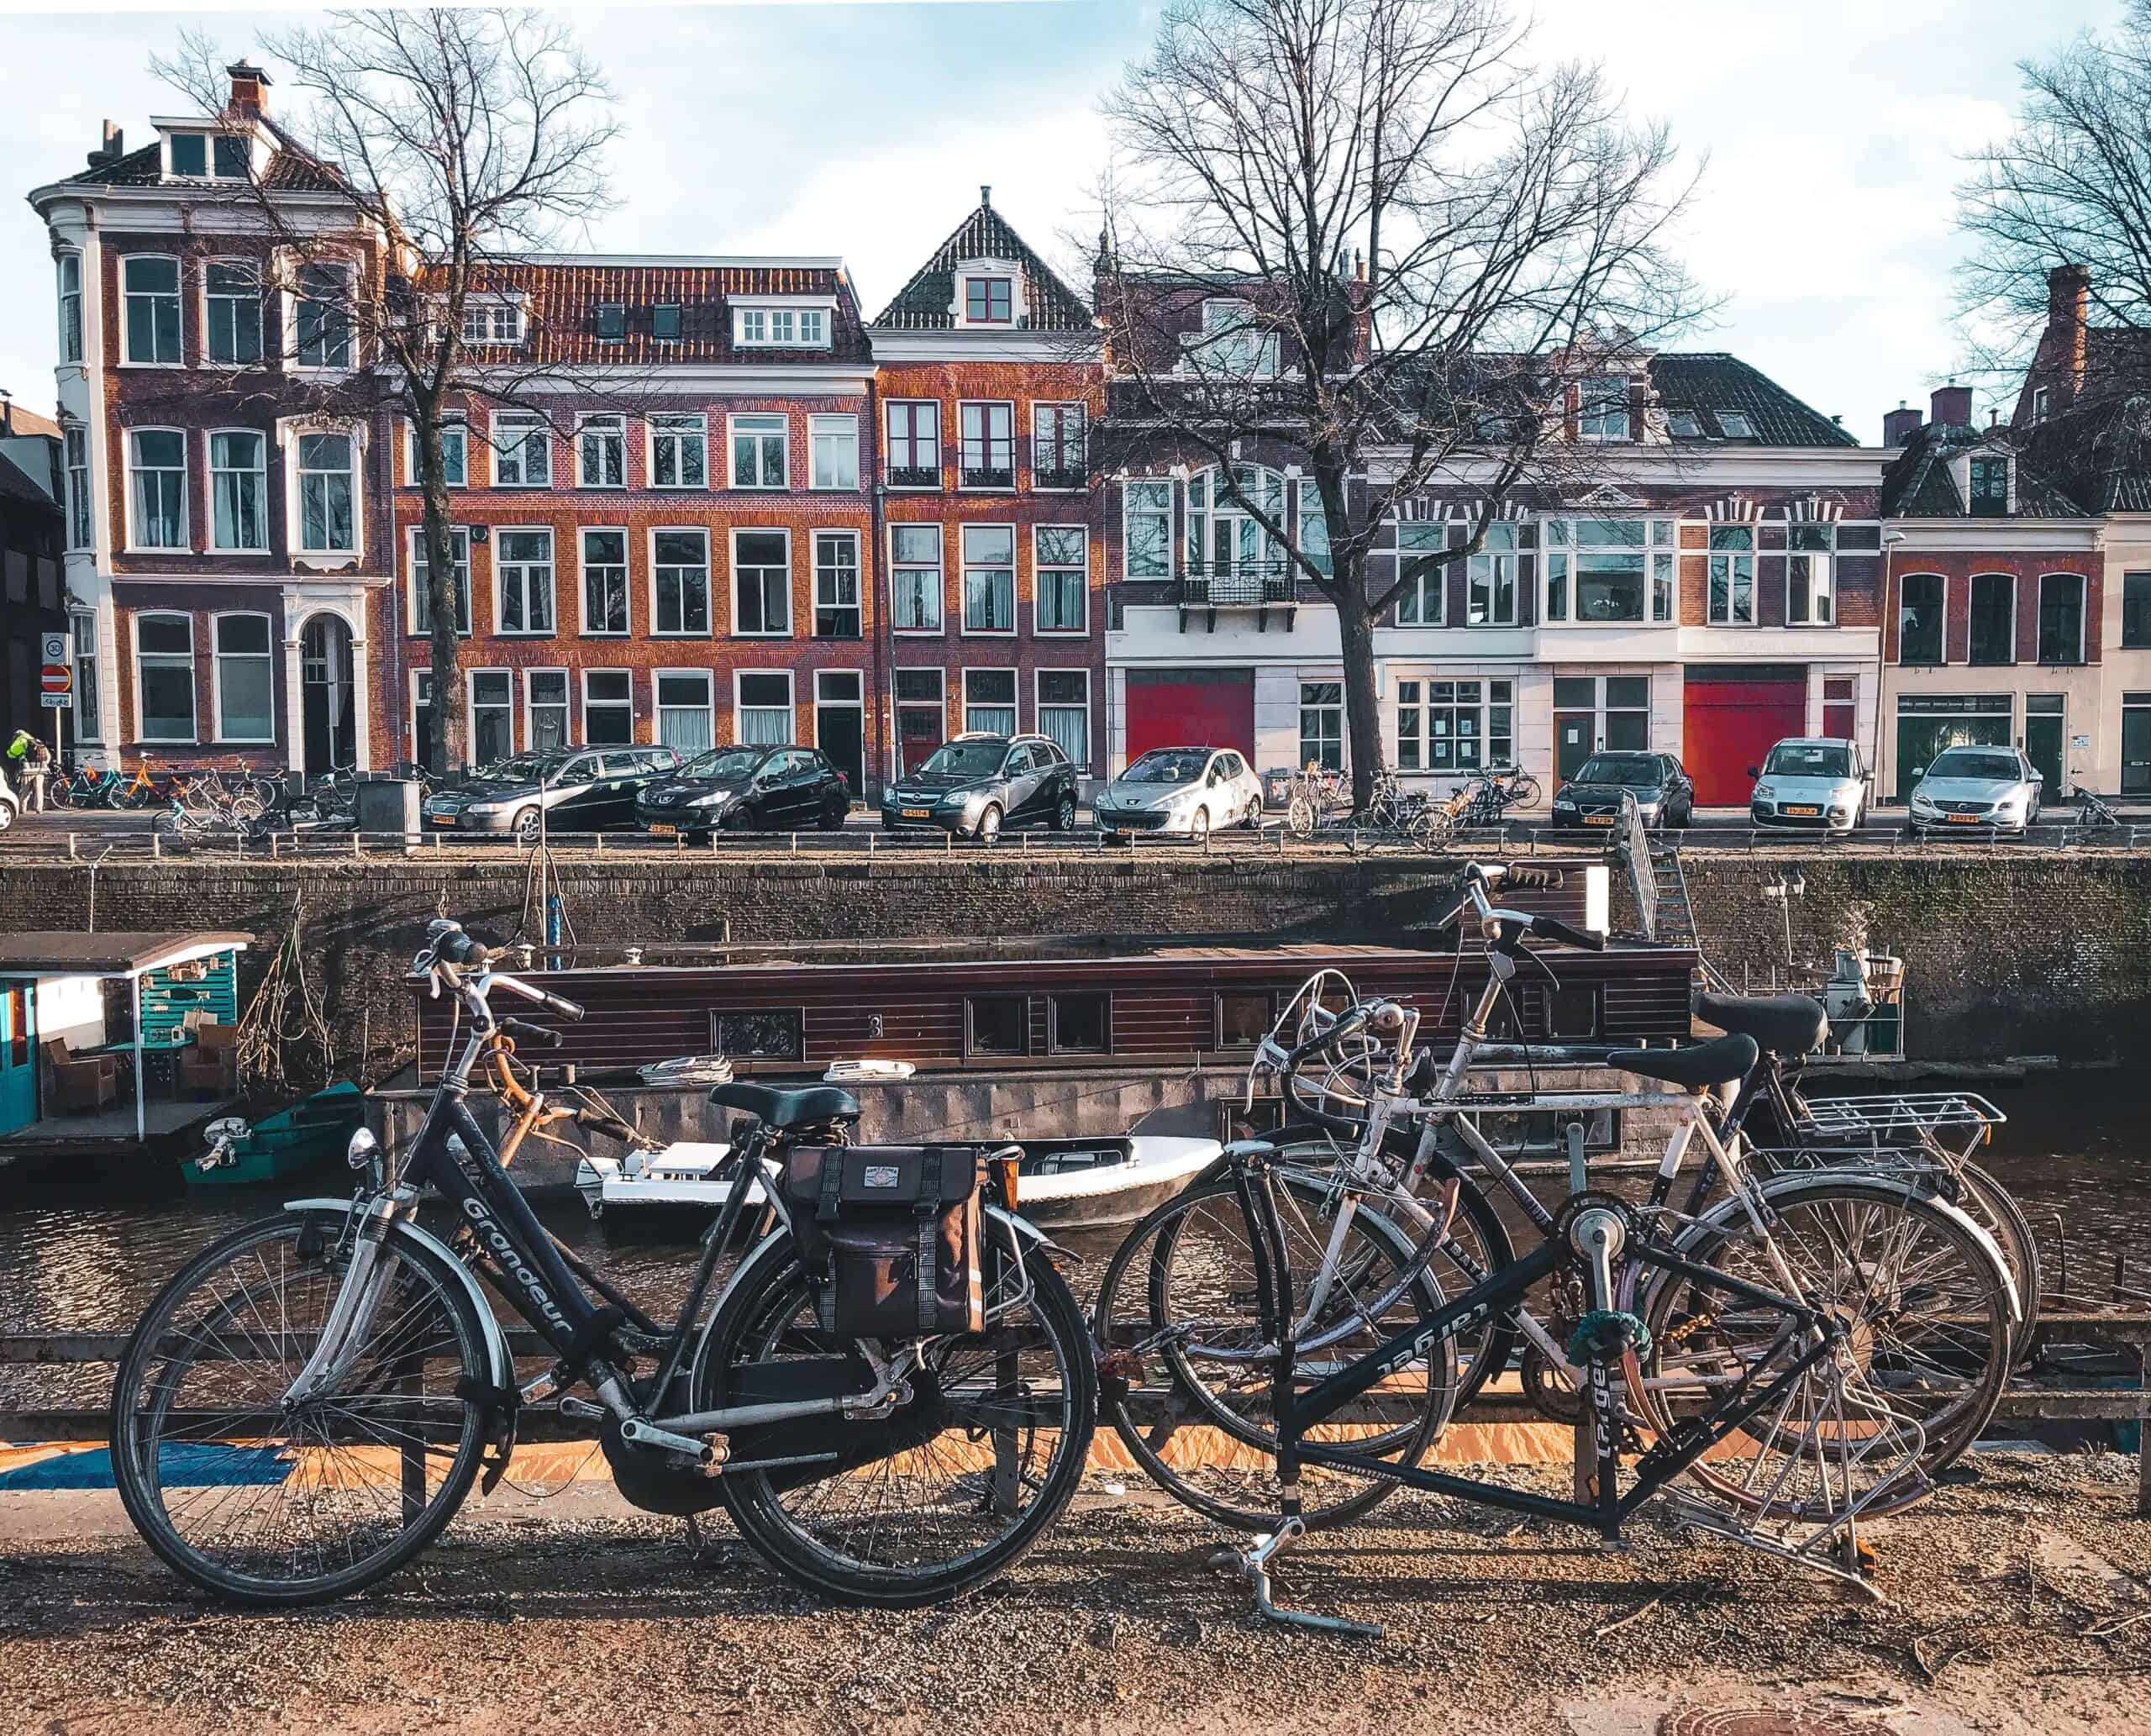 Best things to do in Groningen Netherlands - Kayla Ihrig - Bikes and row houses